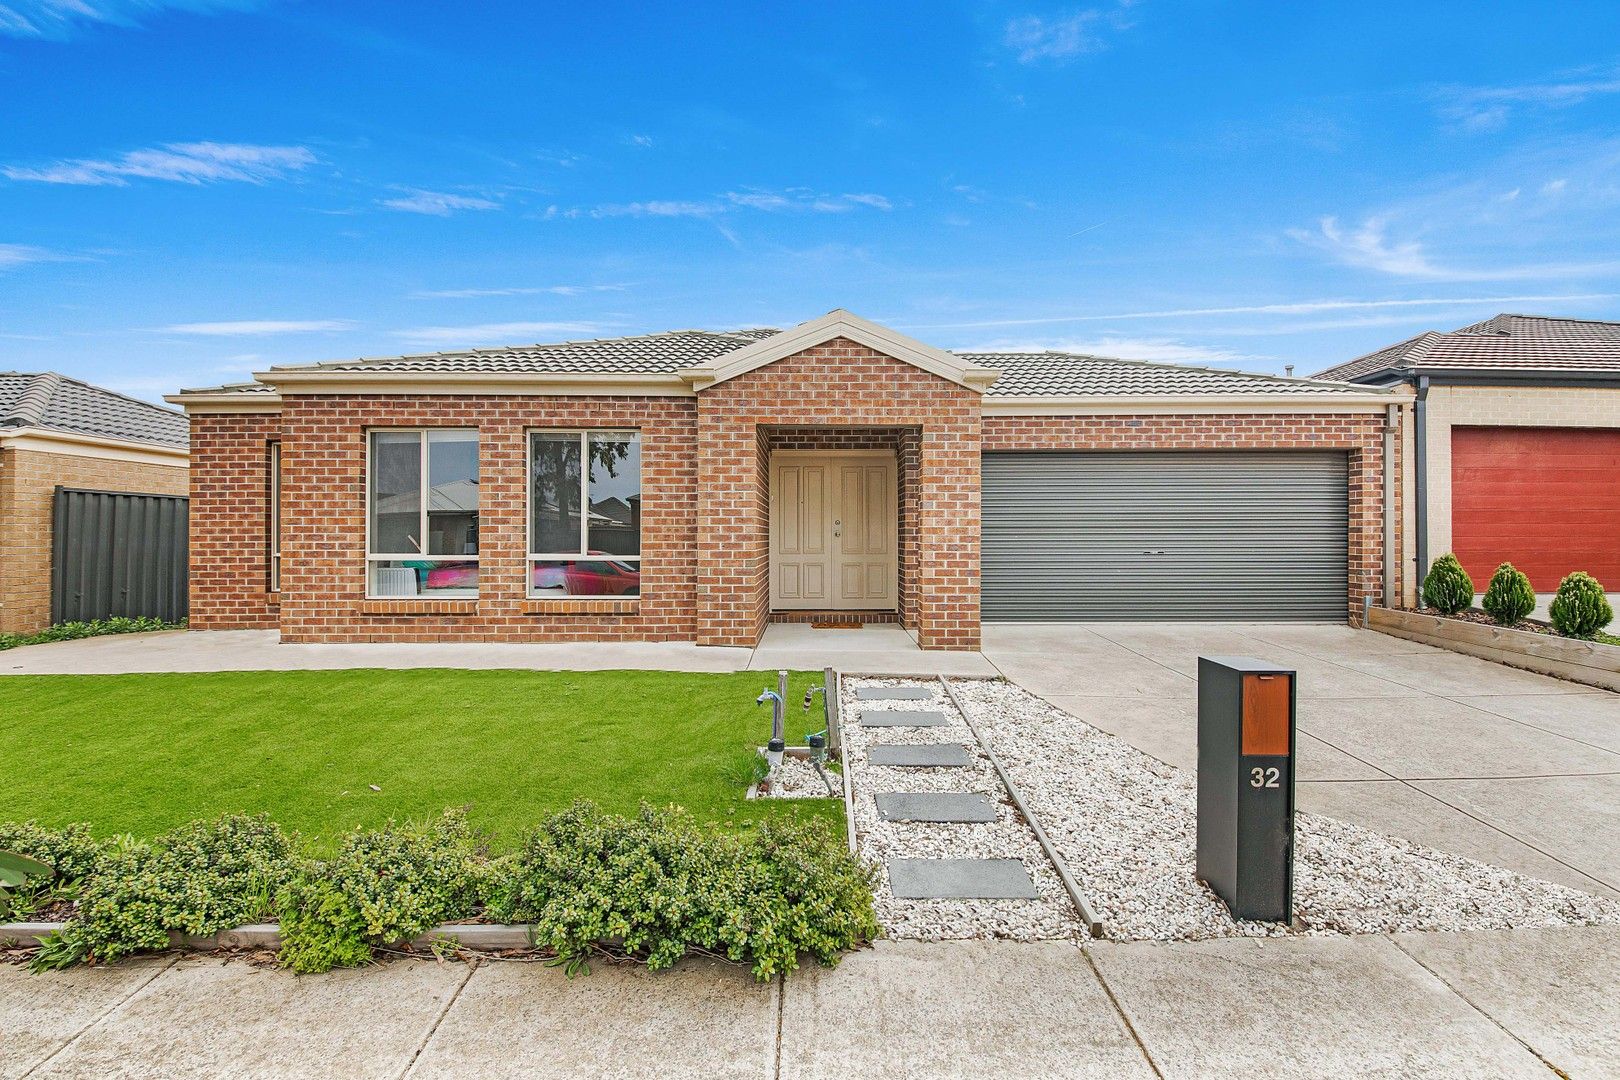 4 bedrooms House in 32 Grovedale Way MANOR LAKES VIC, 3024